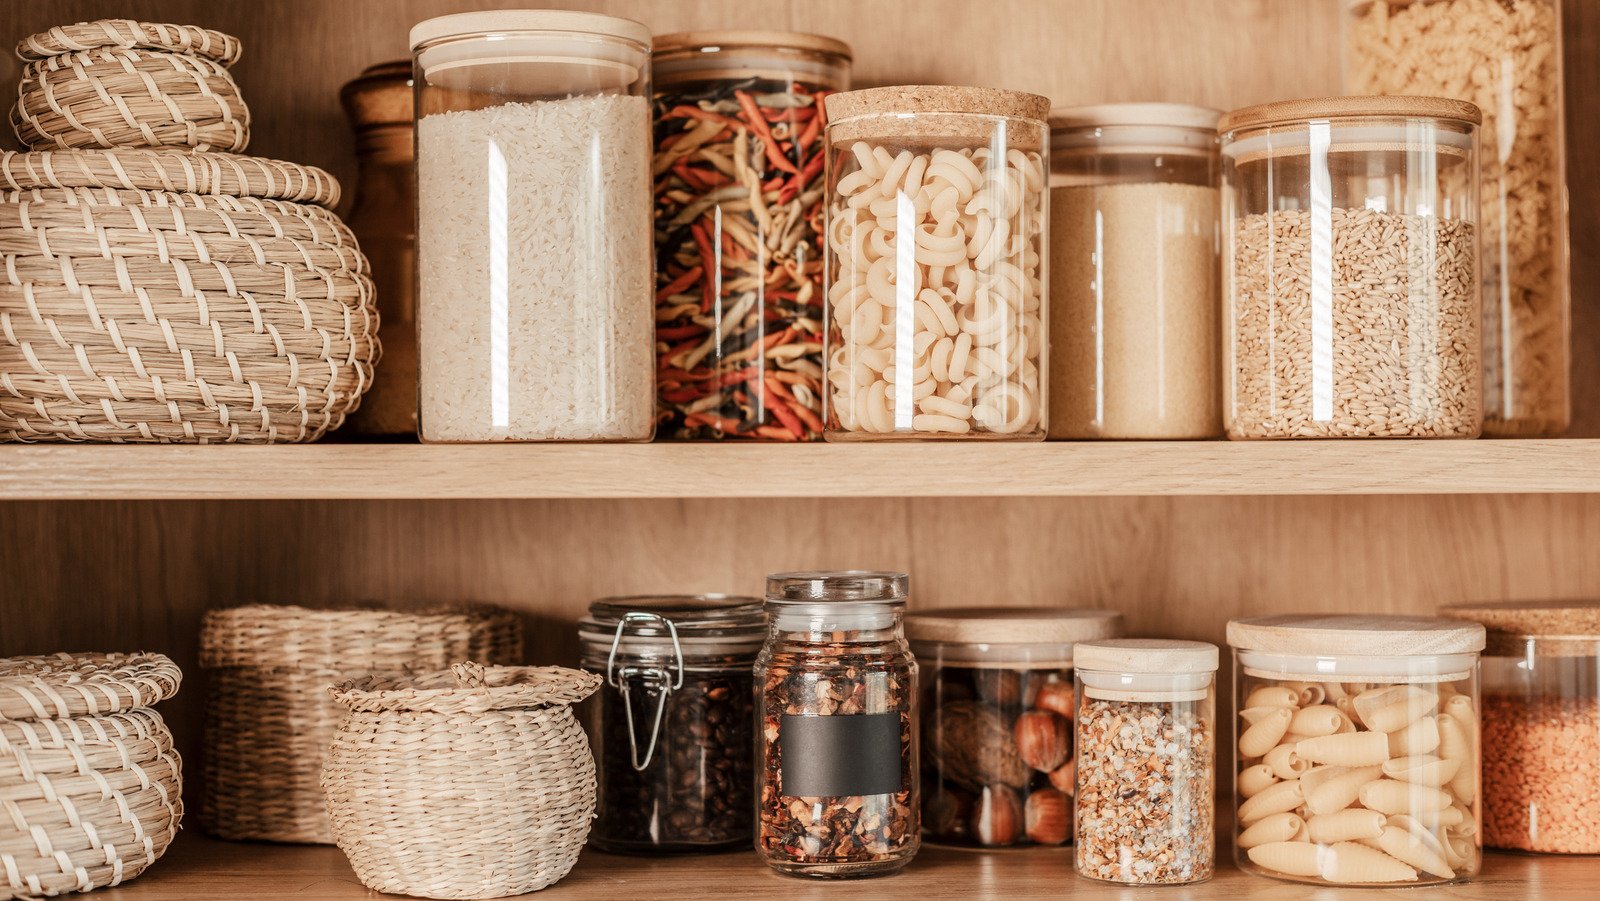 3 Clever Ideas For Building A Pantry For Extra Kitchen Storage - House Digest